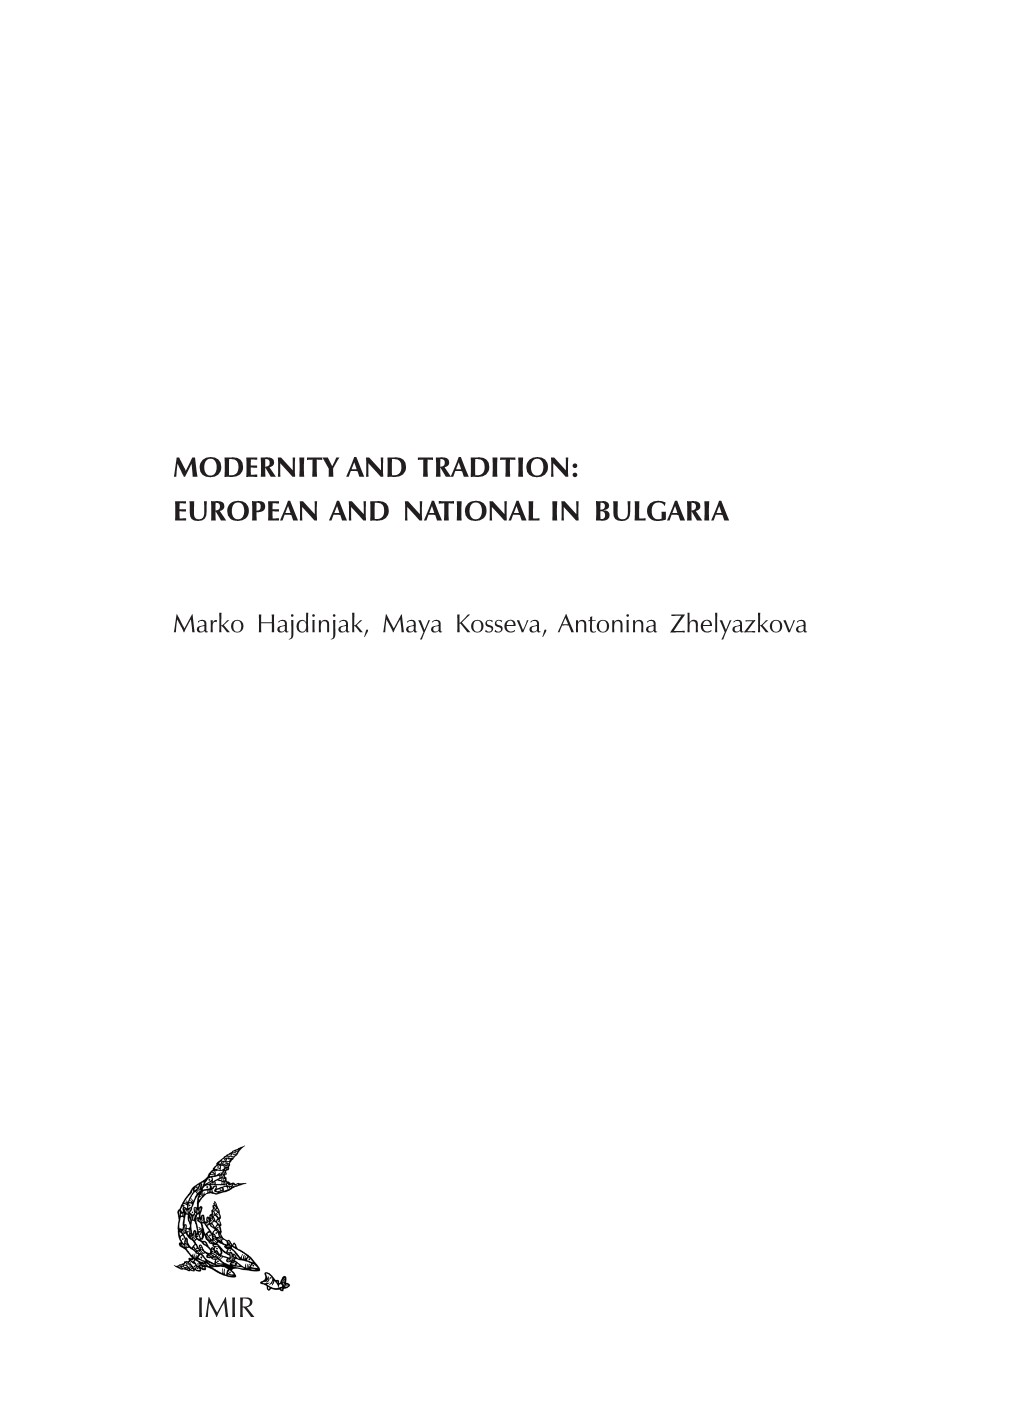 Modernity and Tradition: European and National in Bulgaria